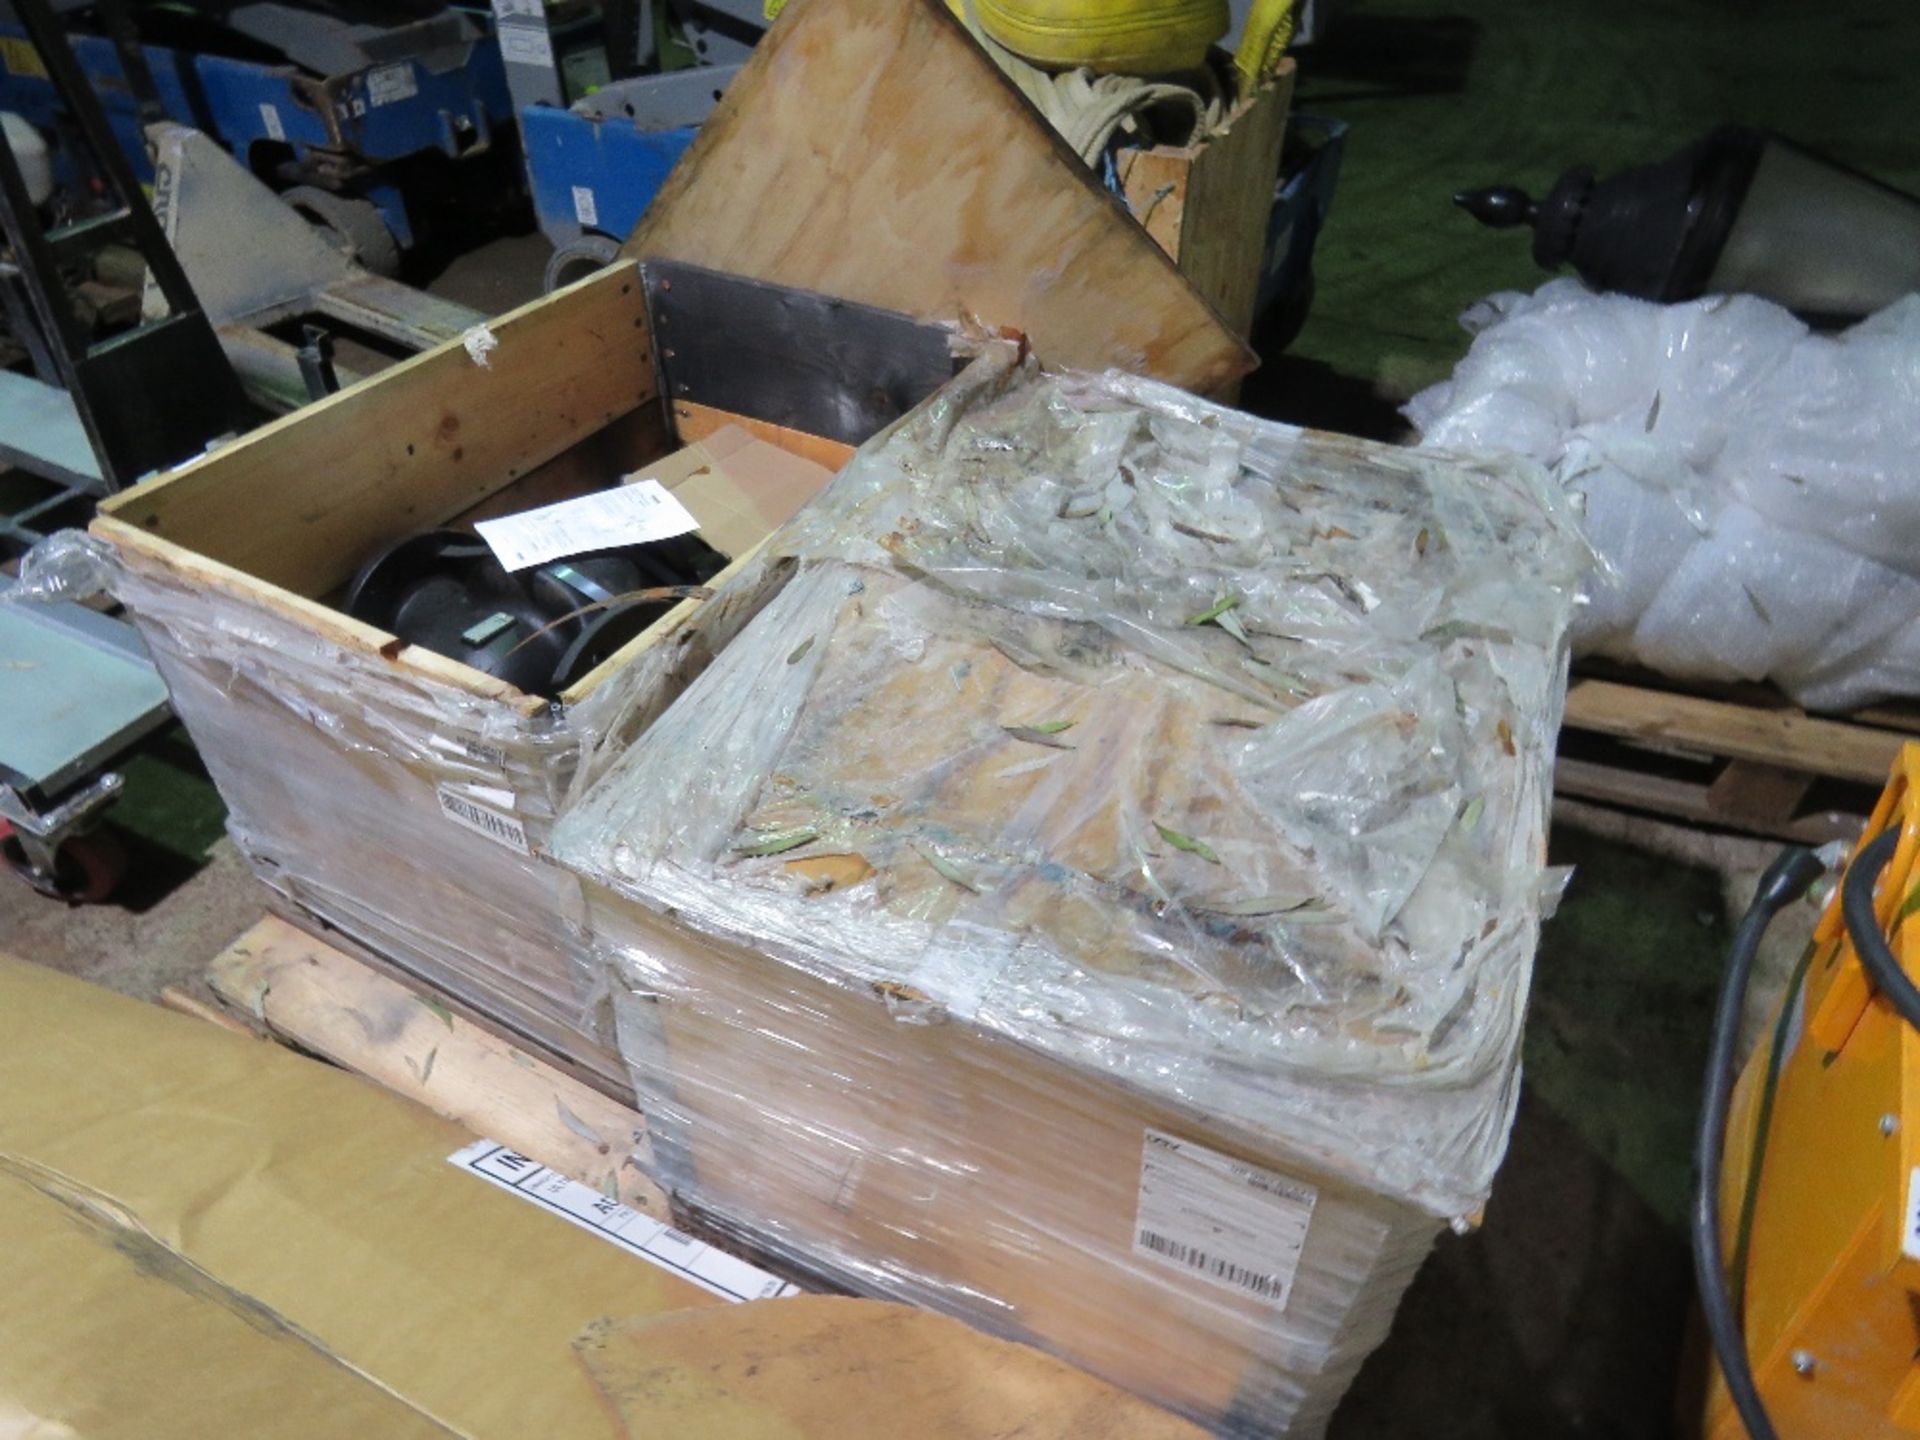 2 X LARGE FRESE 53-1203 GATE VALVES, BOXED, UNUSED. SOURCED FROM LARGE SCALE COMPANY LIQUIDATION. - Image 6 of 6